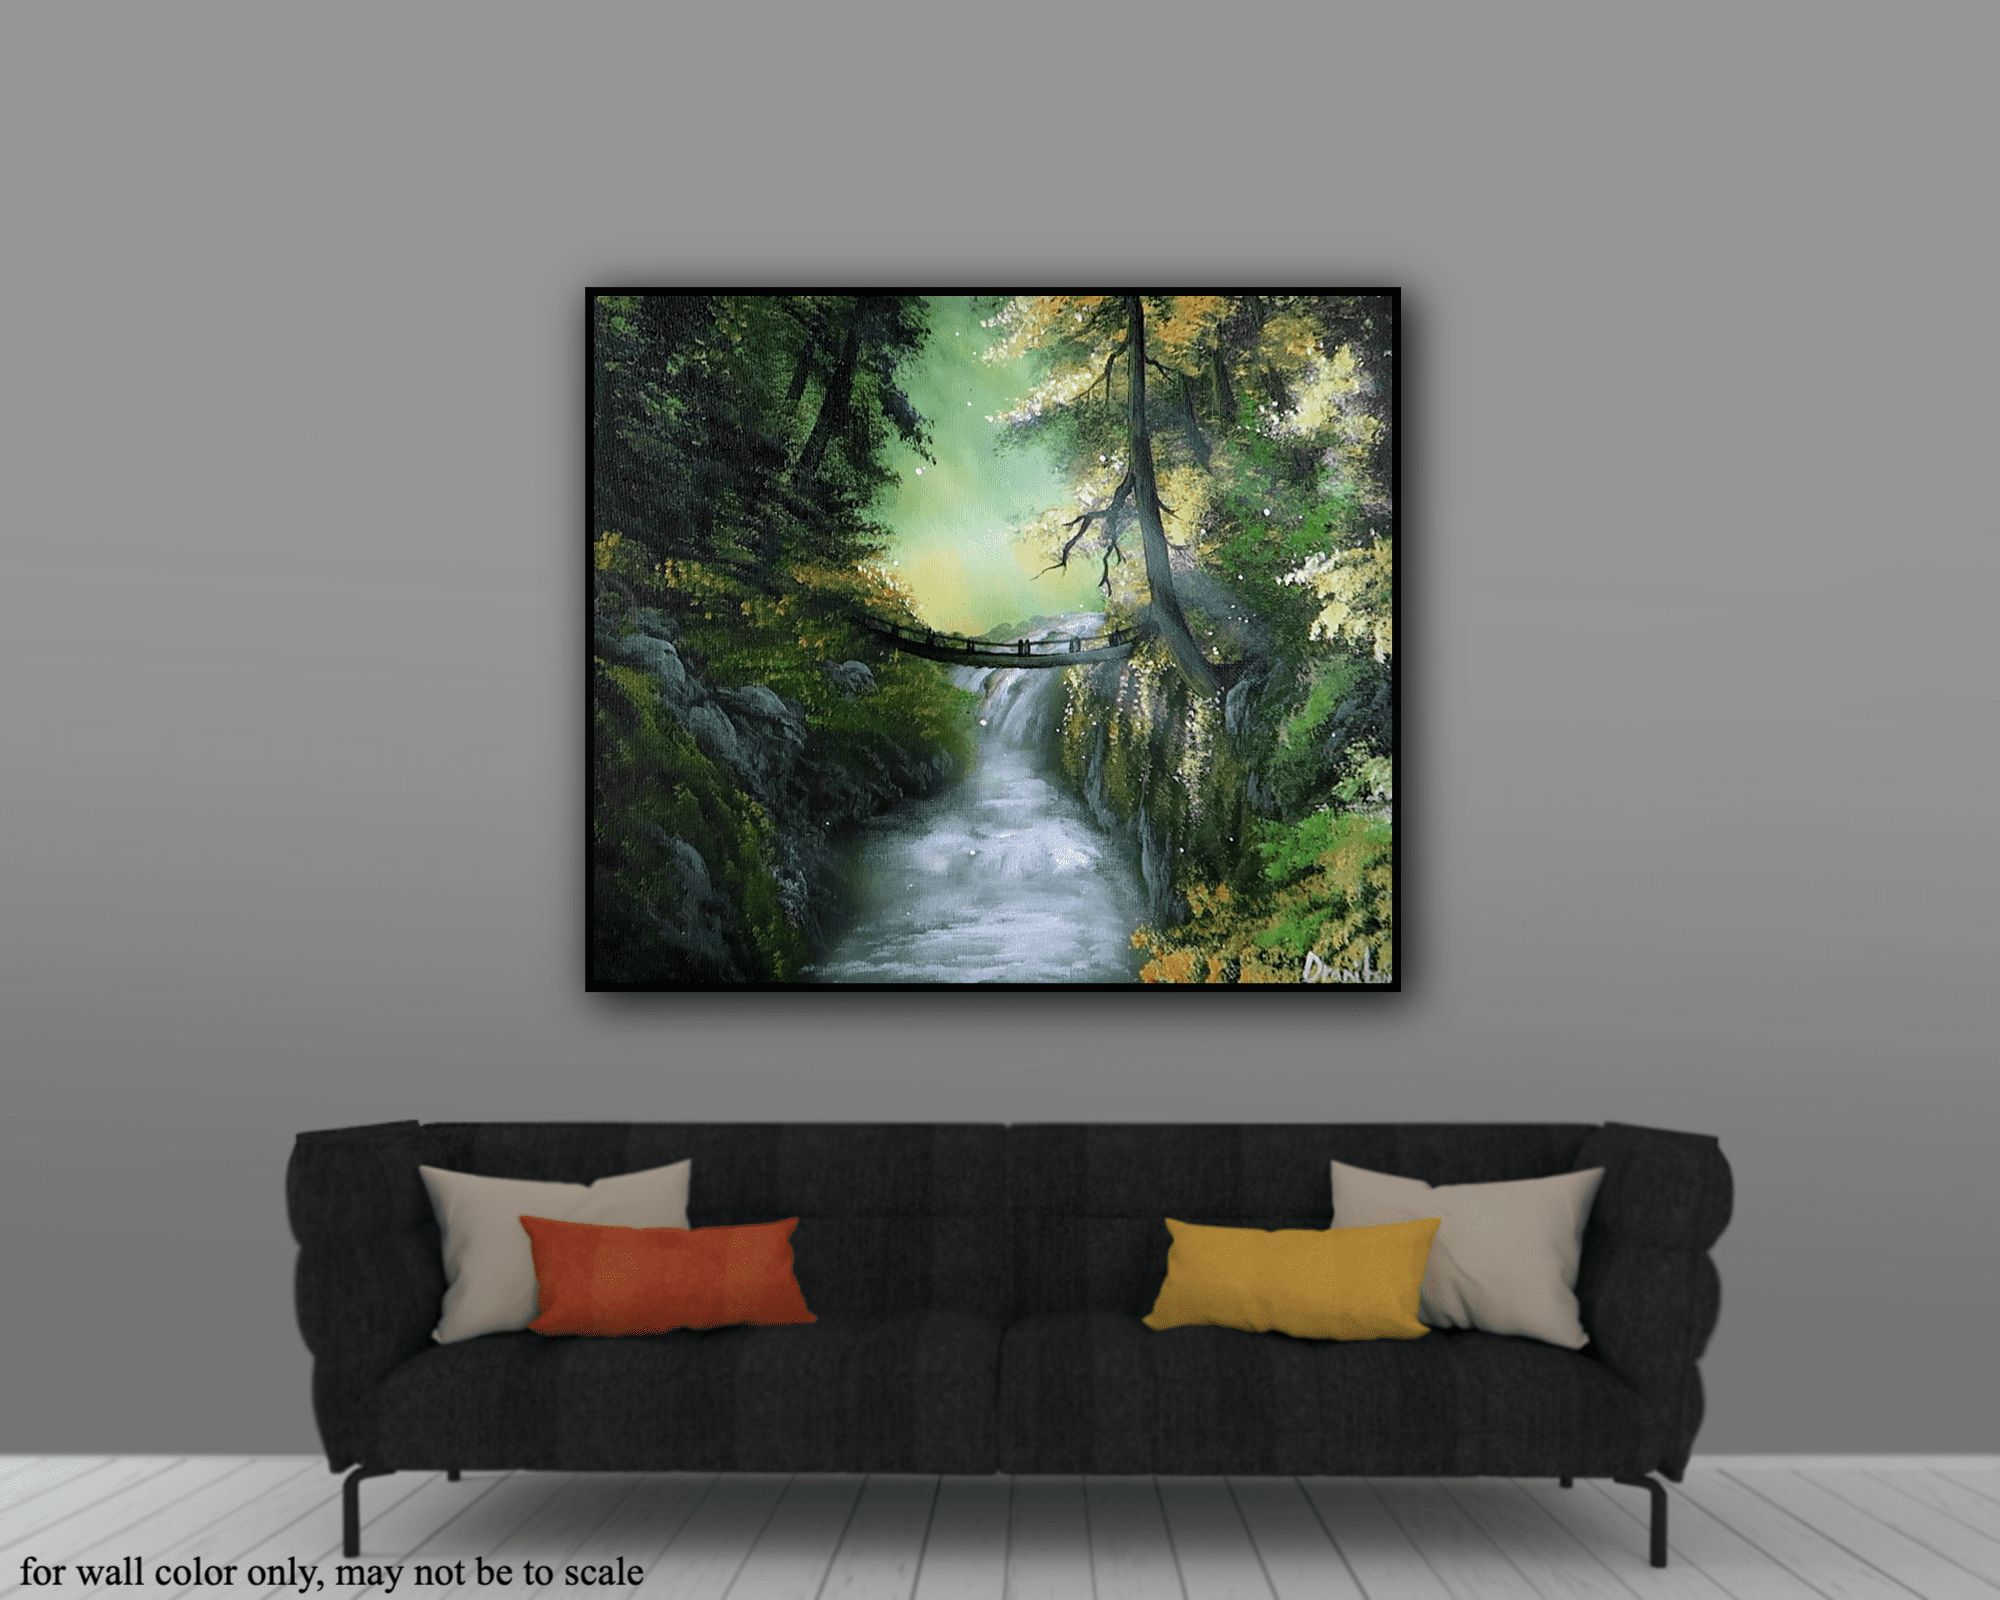 sunny side of the waterfall acrylic landscape painting by urartstudio.com 5